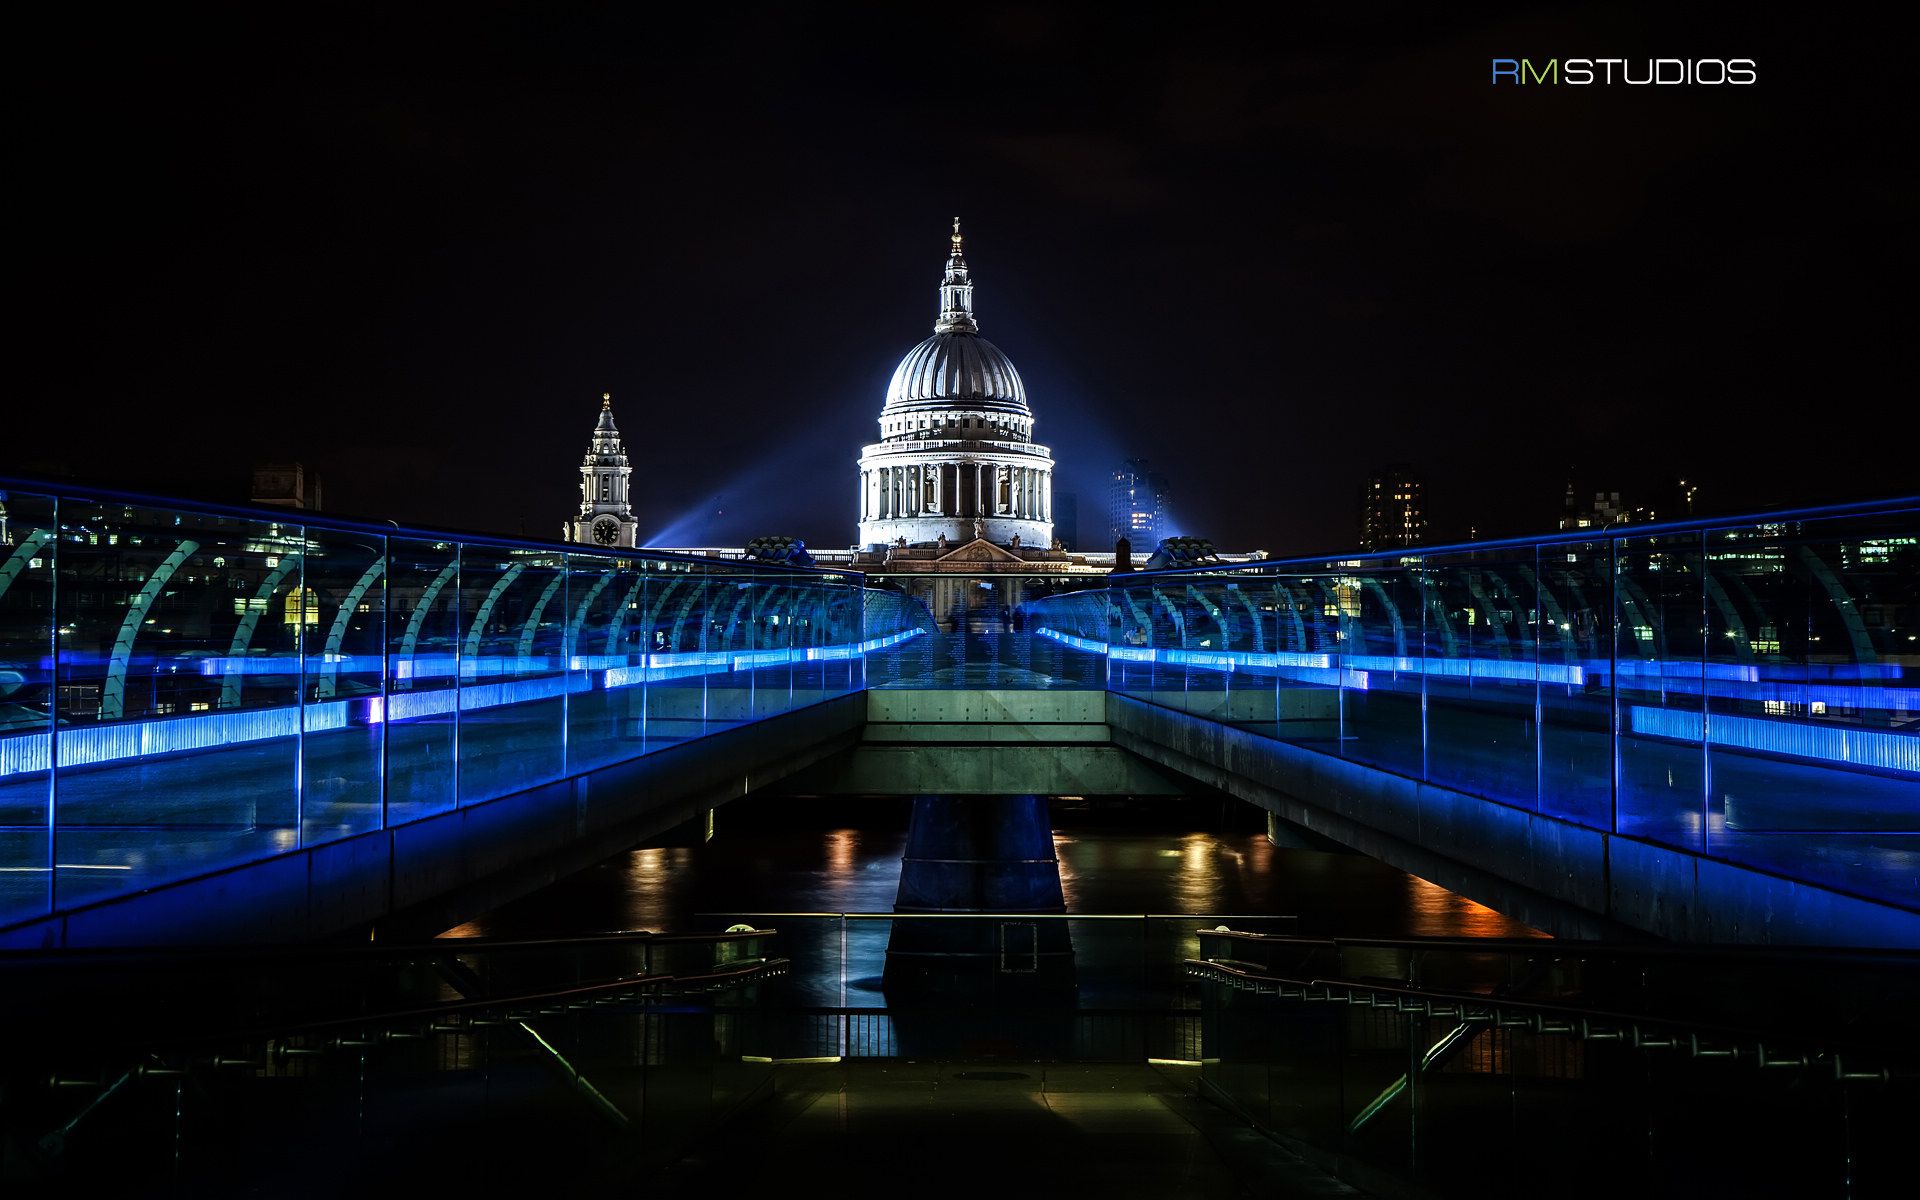 Nights in London background and Windows 8 Themes All for Windows